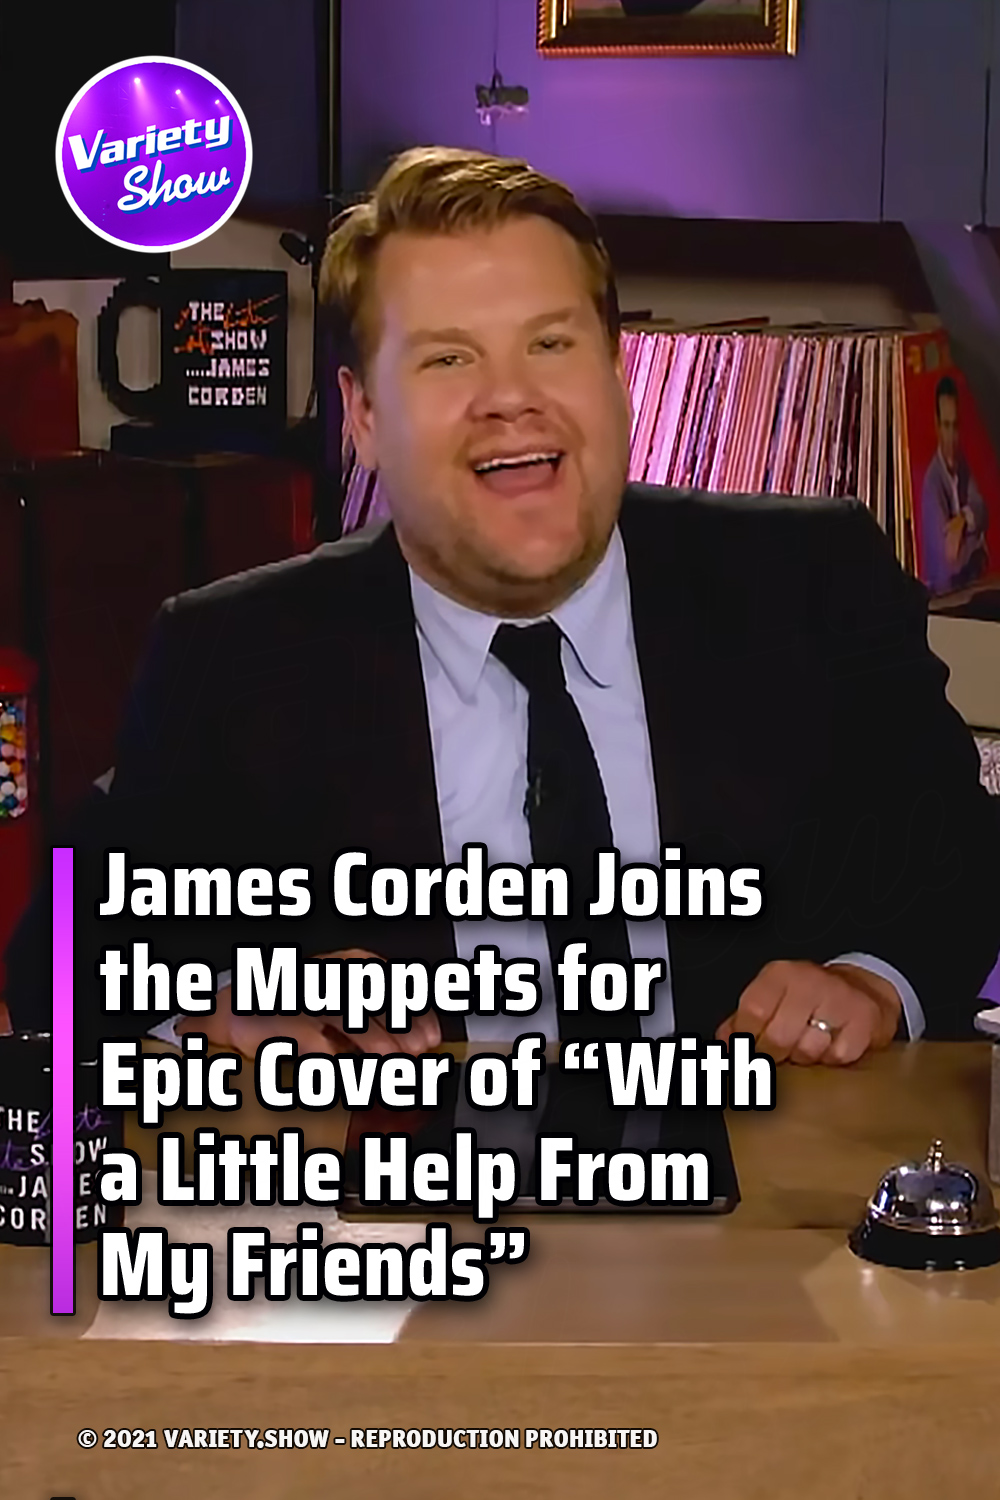 James Corden Joins the Muppets for Epic Cover of “With a Little Help From My Friends”